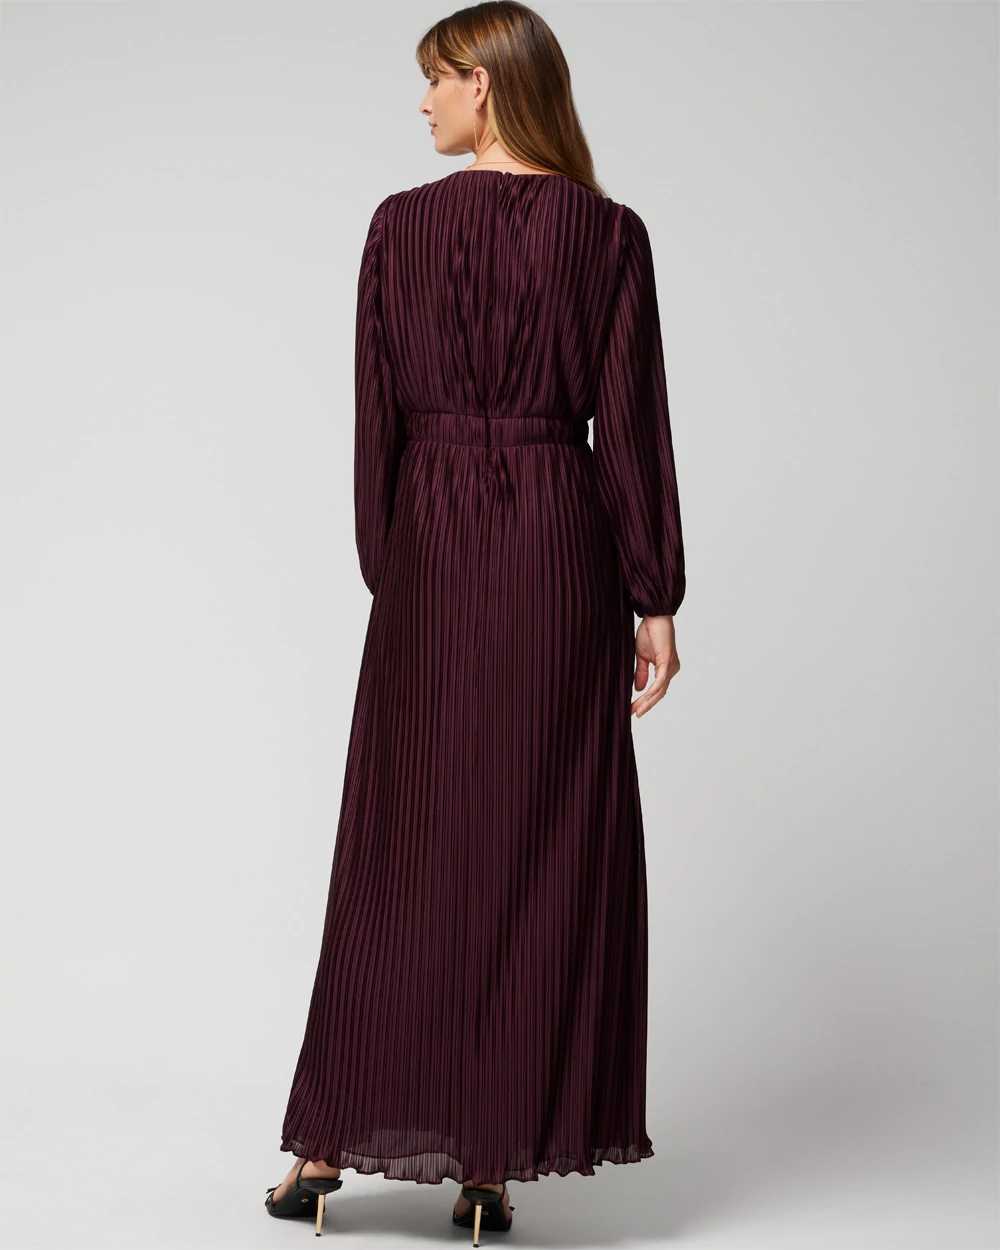 Long Sleeve Chain Cutout Maxi Dress click to view larger image.